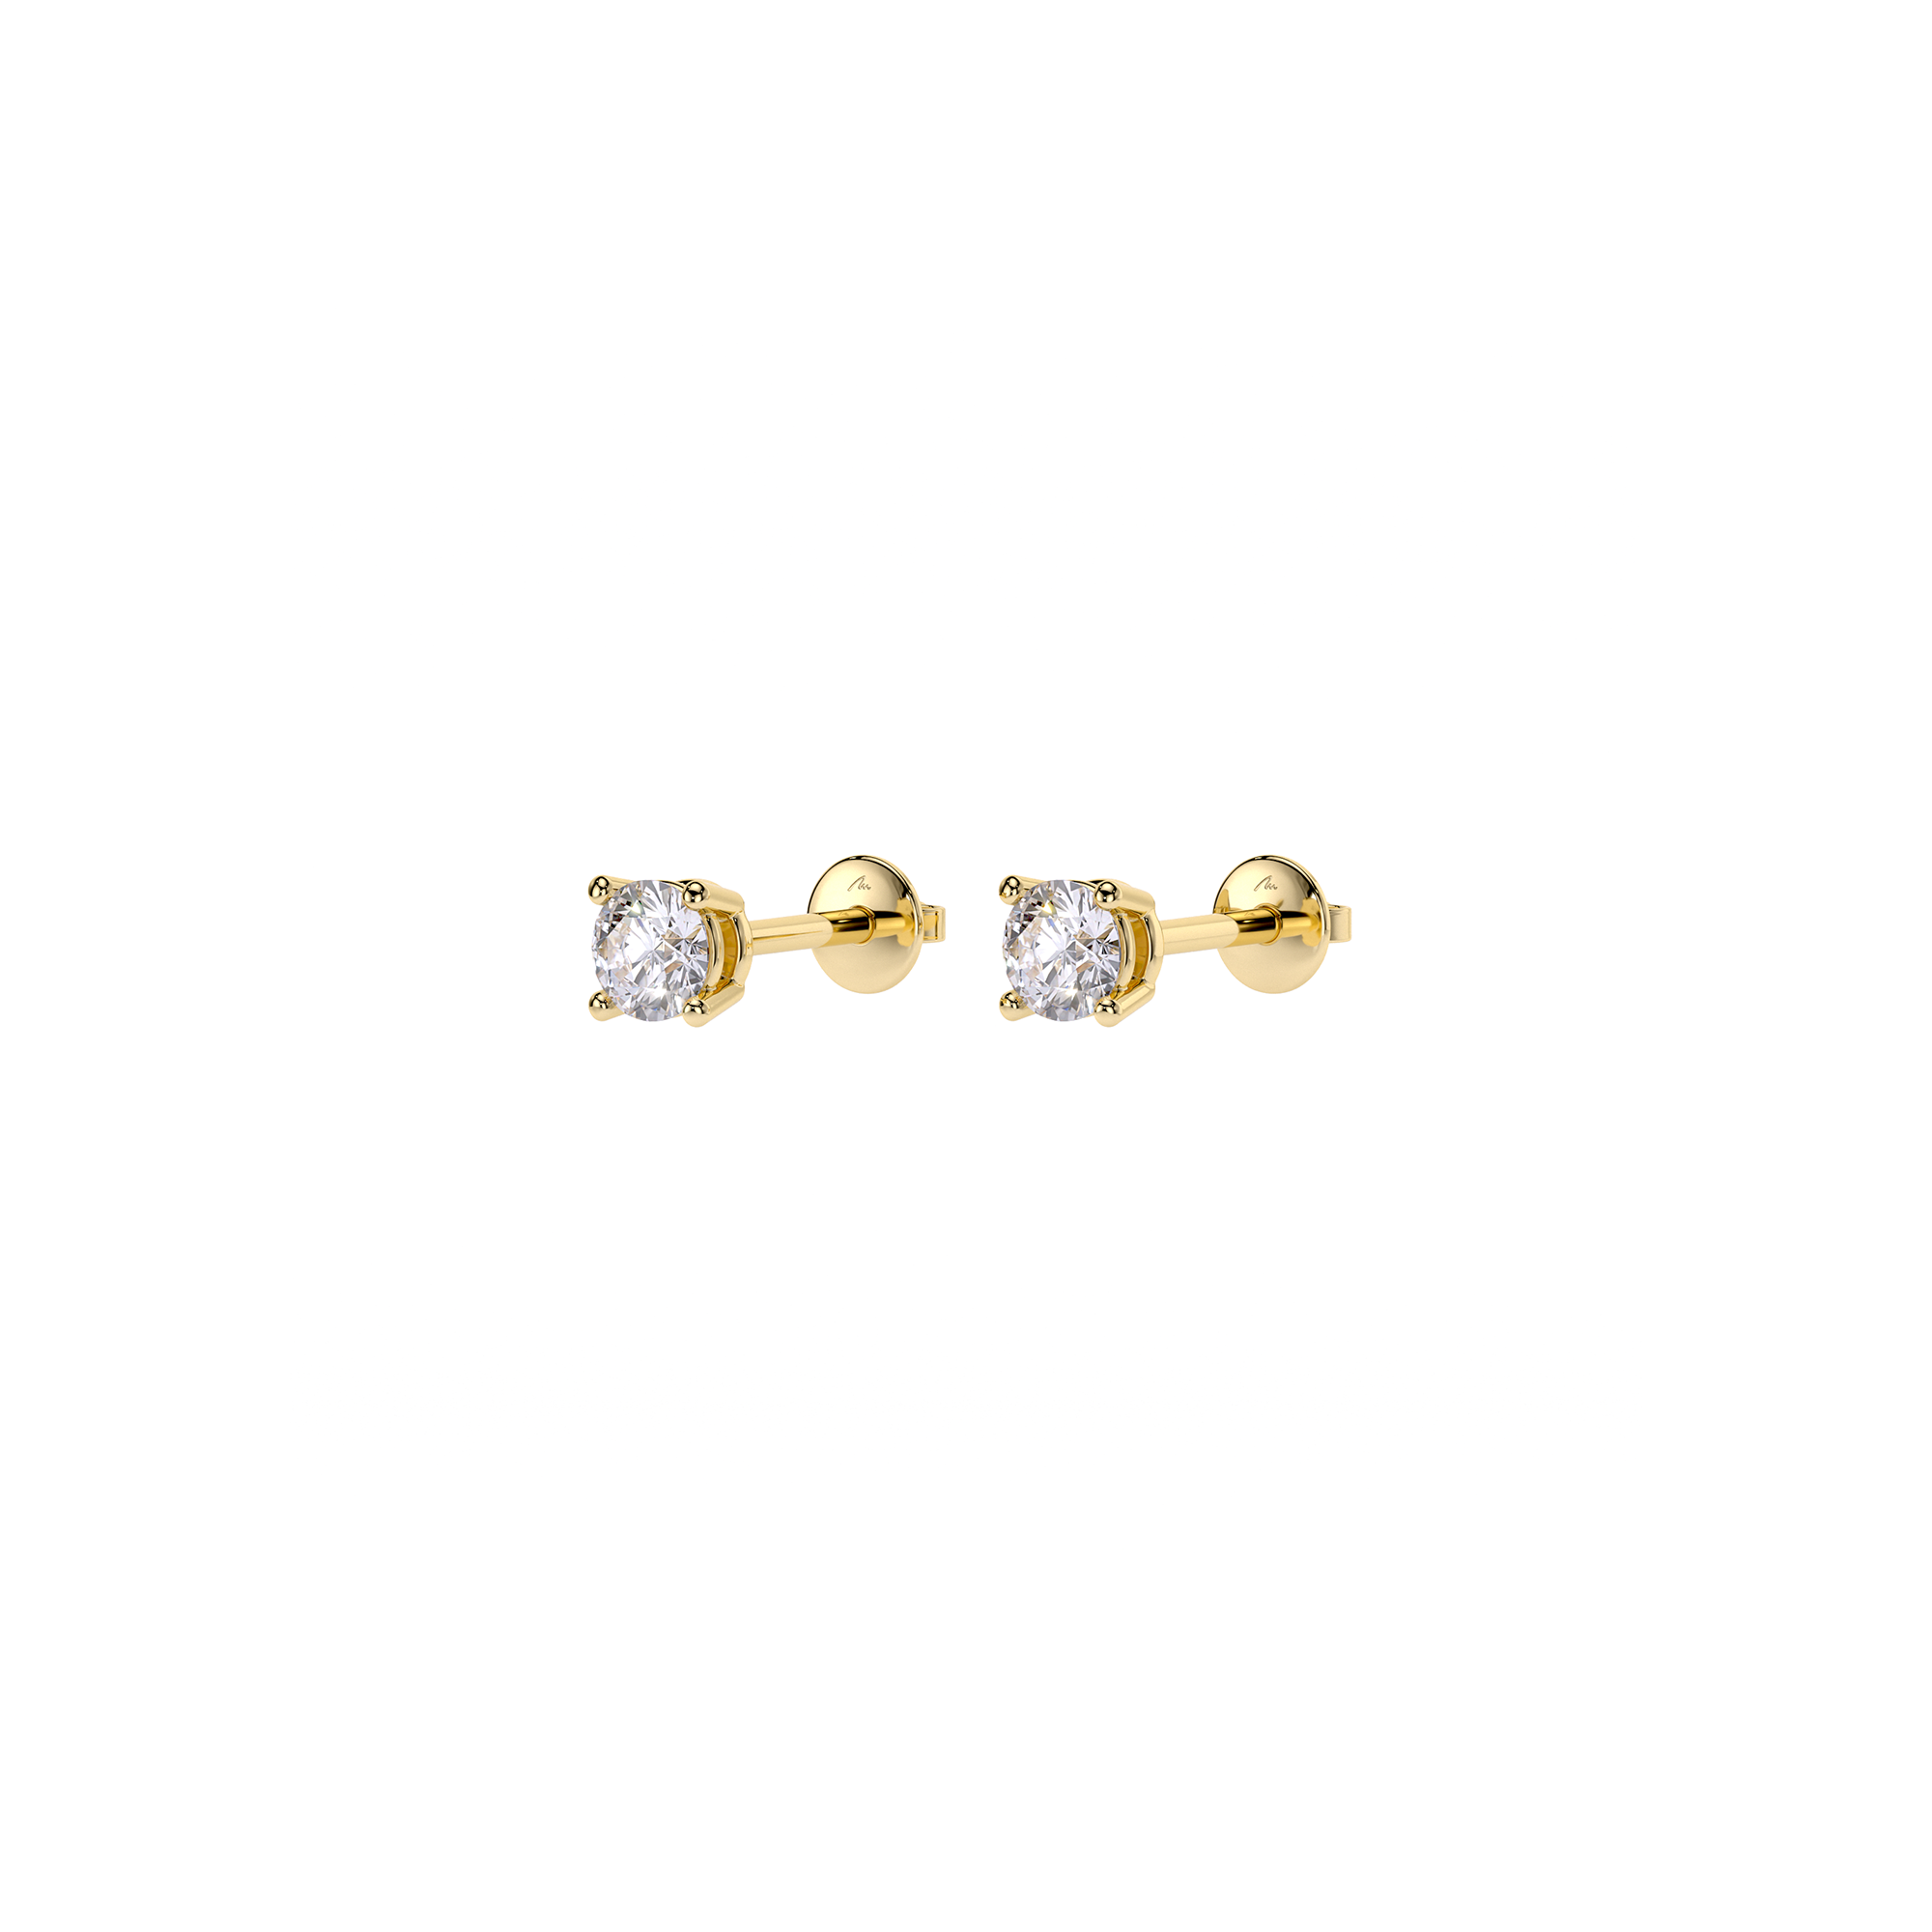 14 K yellow gold Studs earrings with 0.64 CT Lab Diamonds